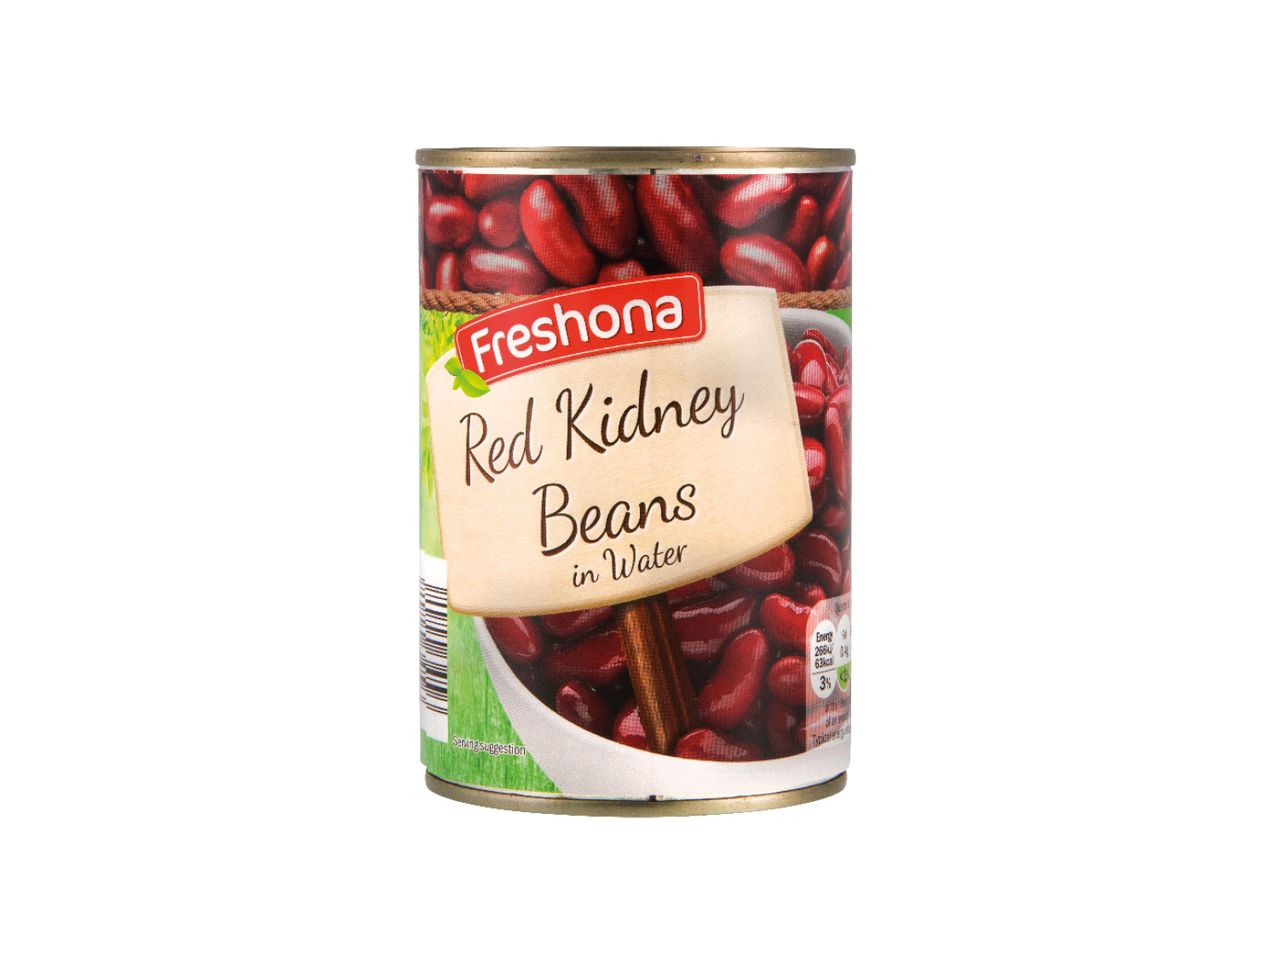 Go to full screen view: Red Kidney Beans - Image 1